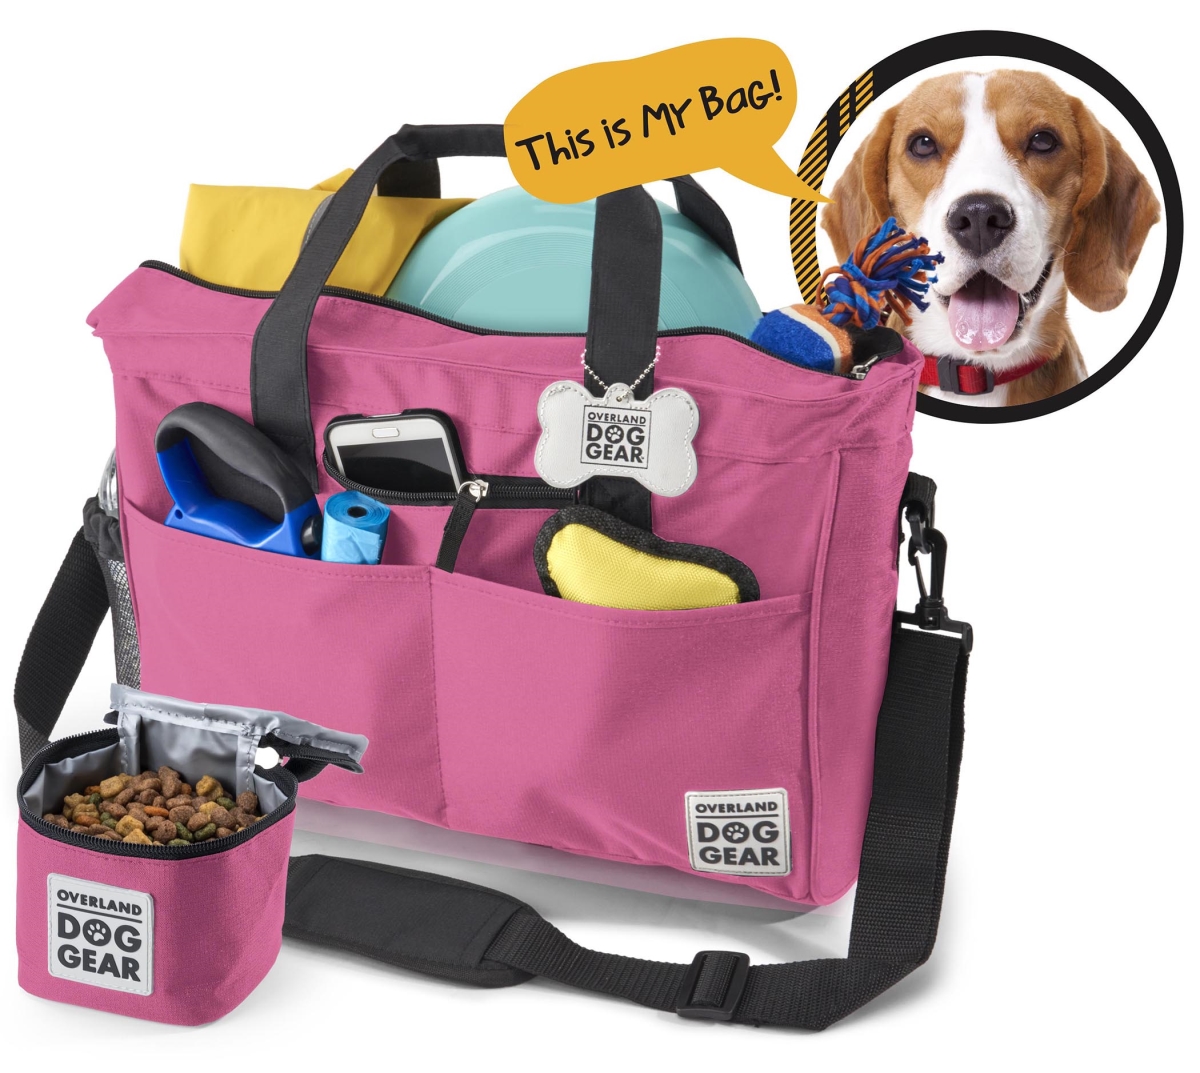 Odg11 Day Away Tote Travel Bag For Dog, Pink